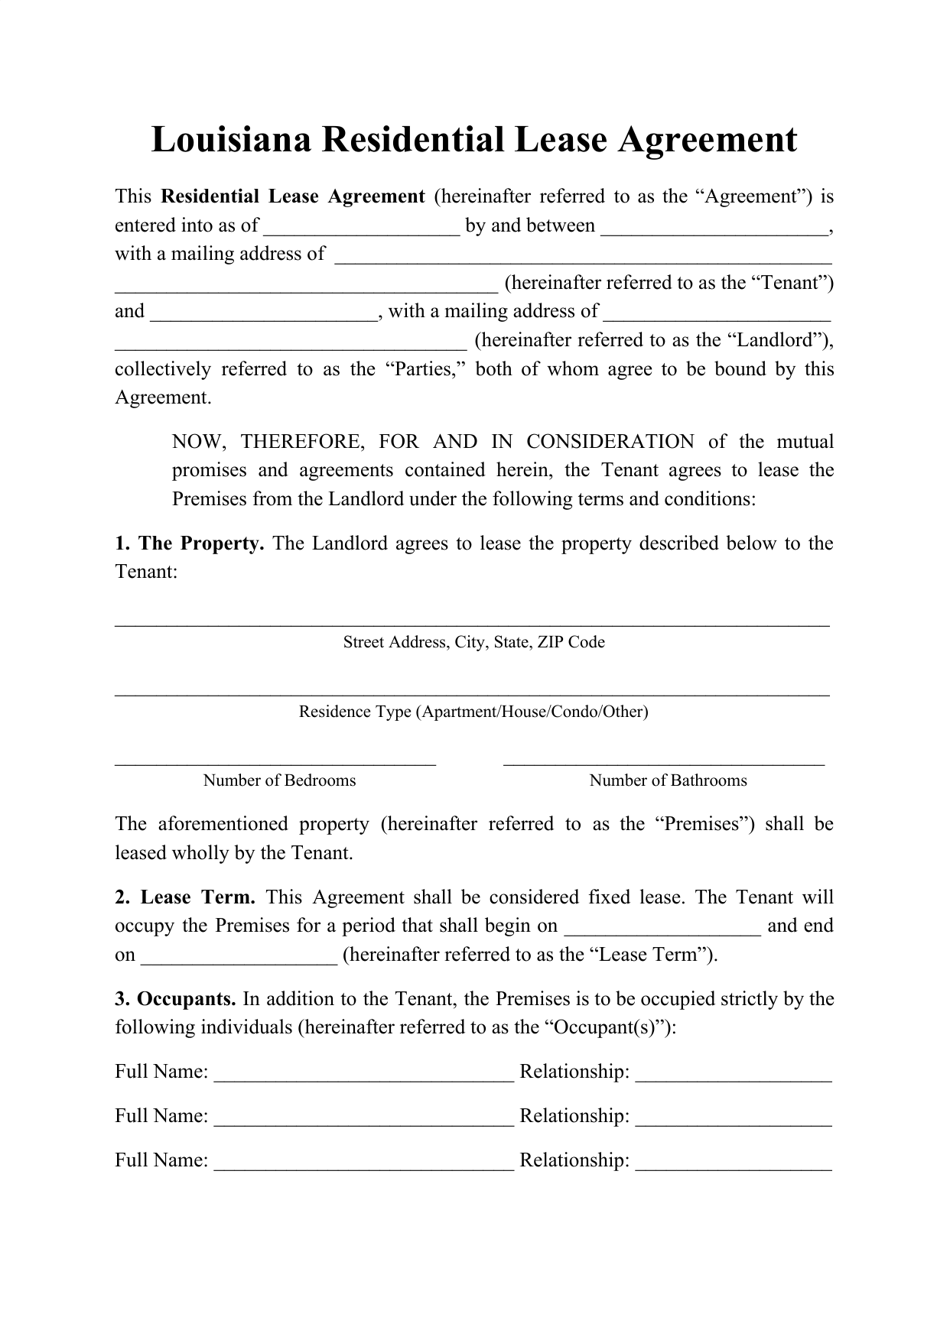 louisiana-residential-lease-agreement-template-fill-out-sign-online